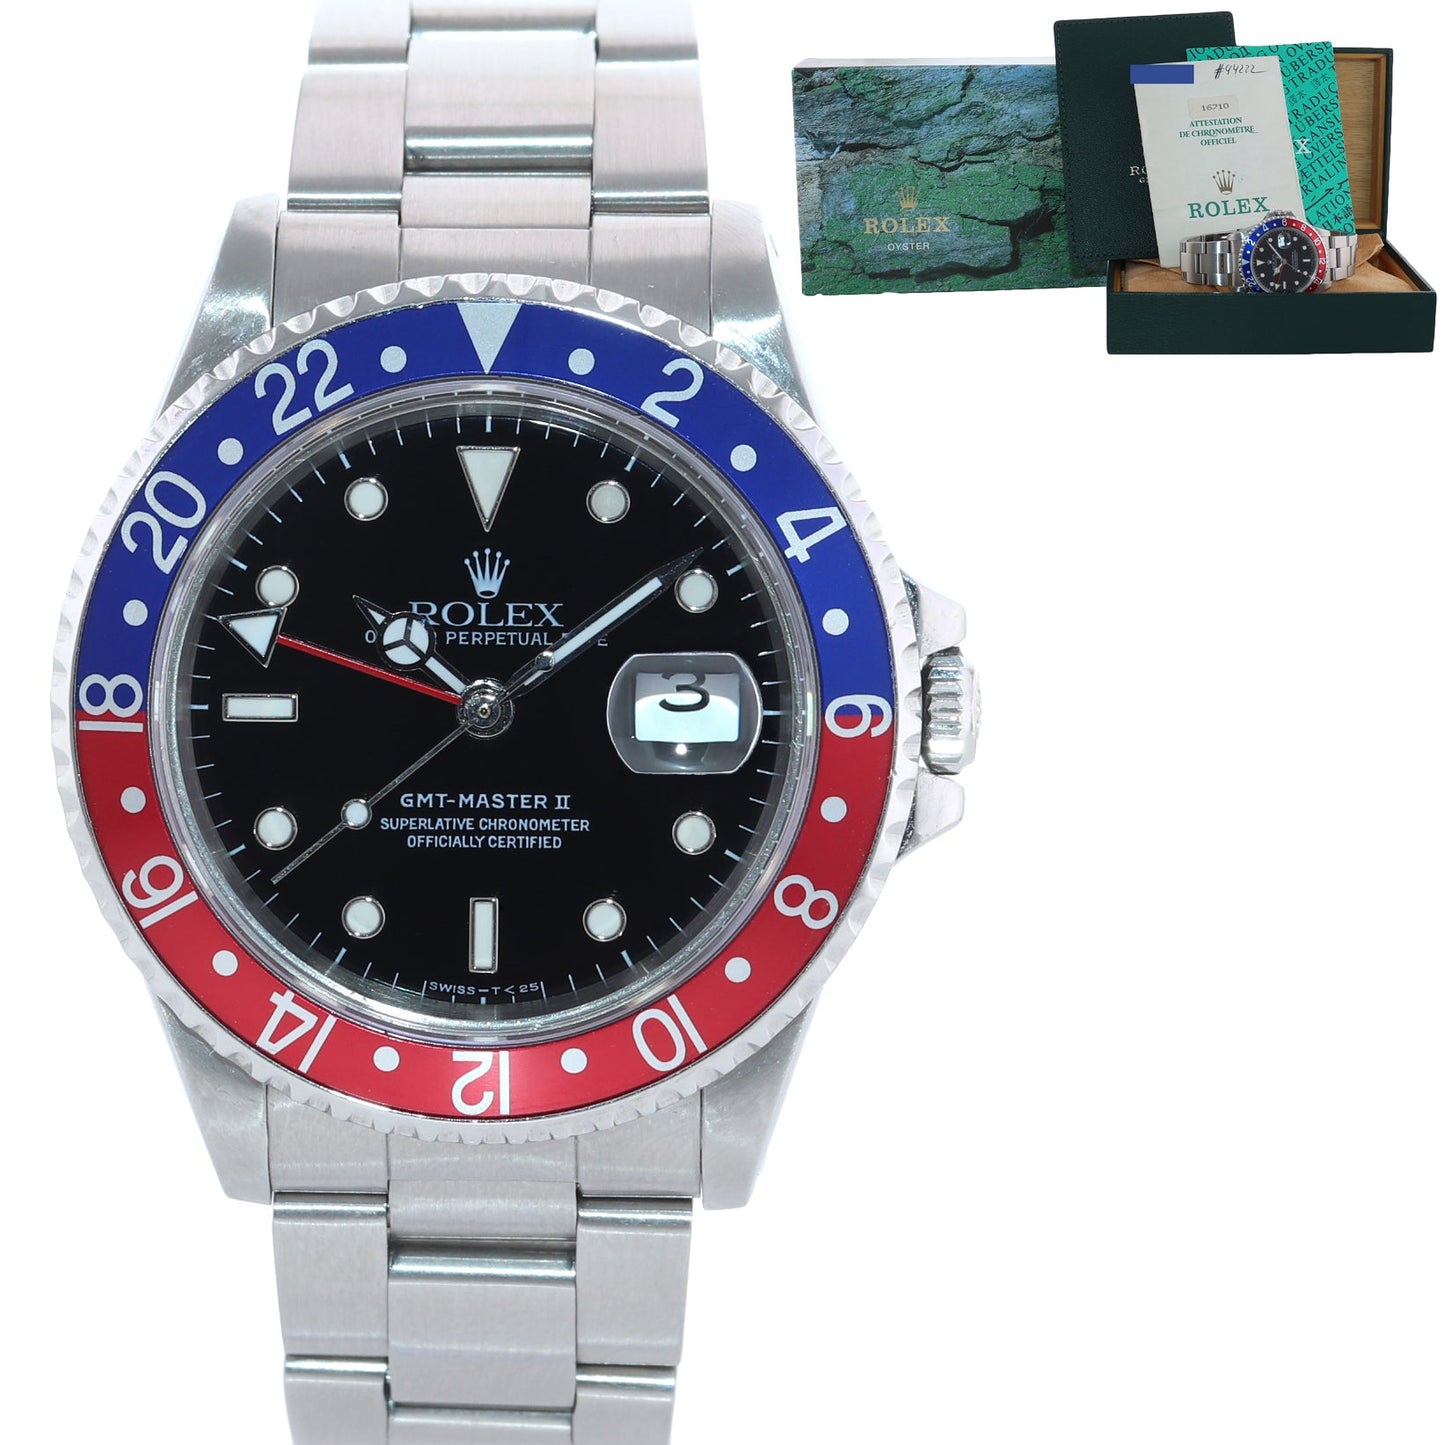 PAPERS Rolex GMT-Master 2 Pepsi Blue Red Steel 16710 40mm Watch Box